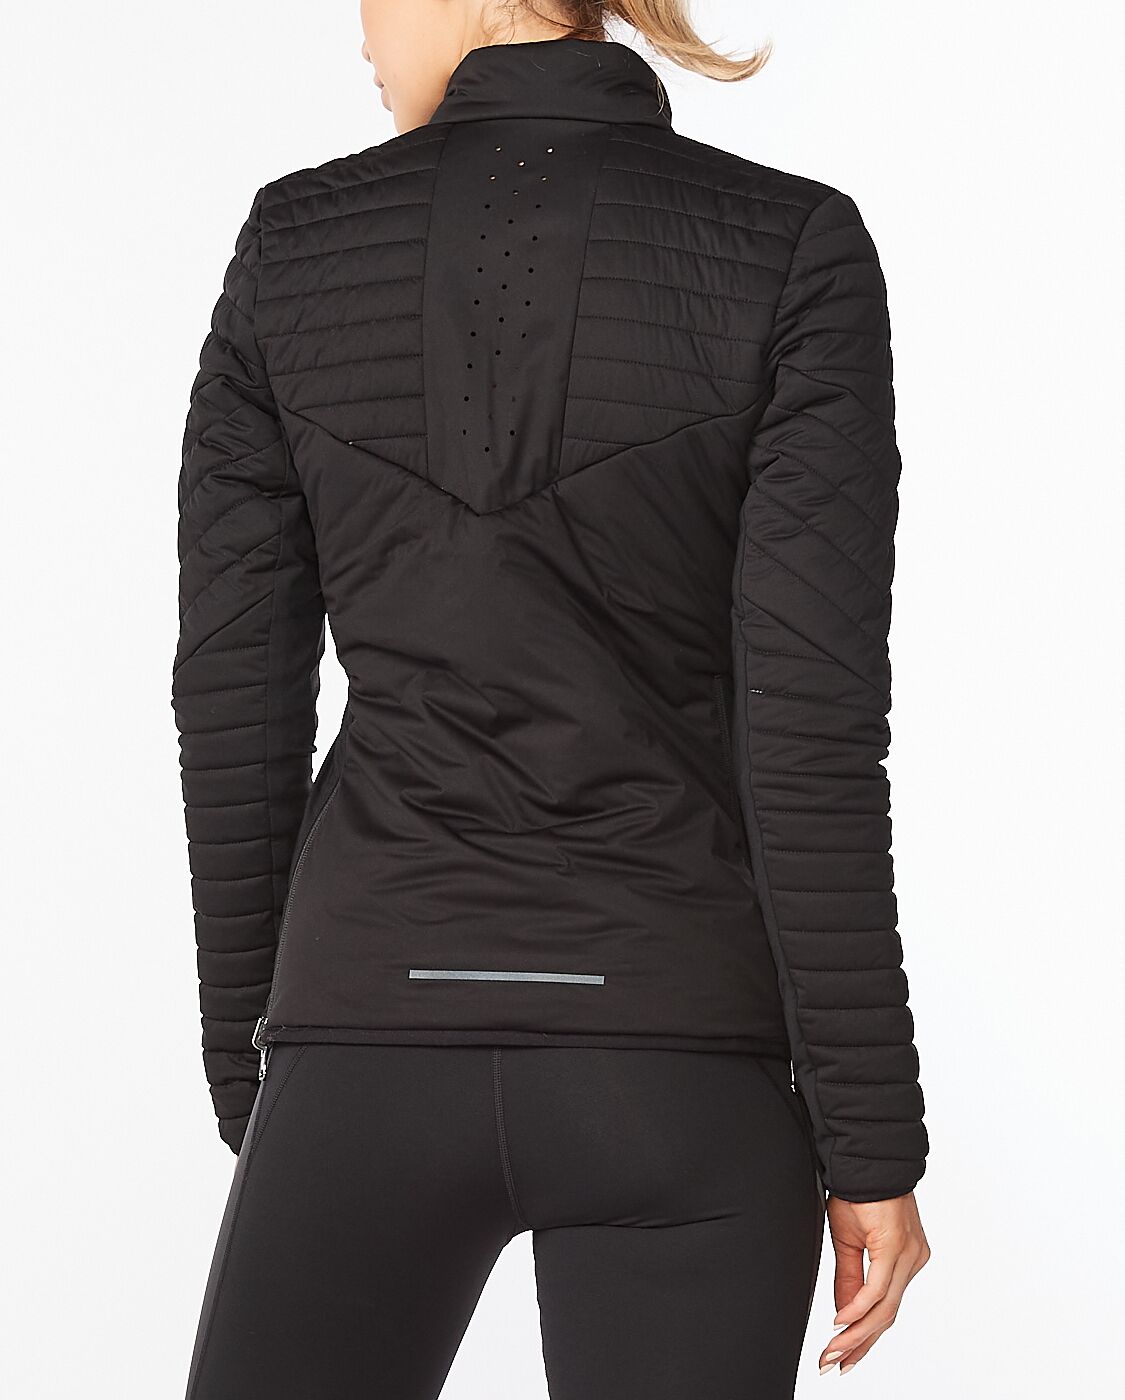 2XU South Africa - Womens Ignition Insulation Jacket - Black/Midnight